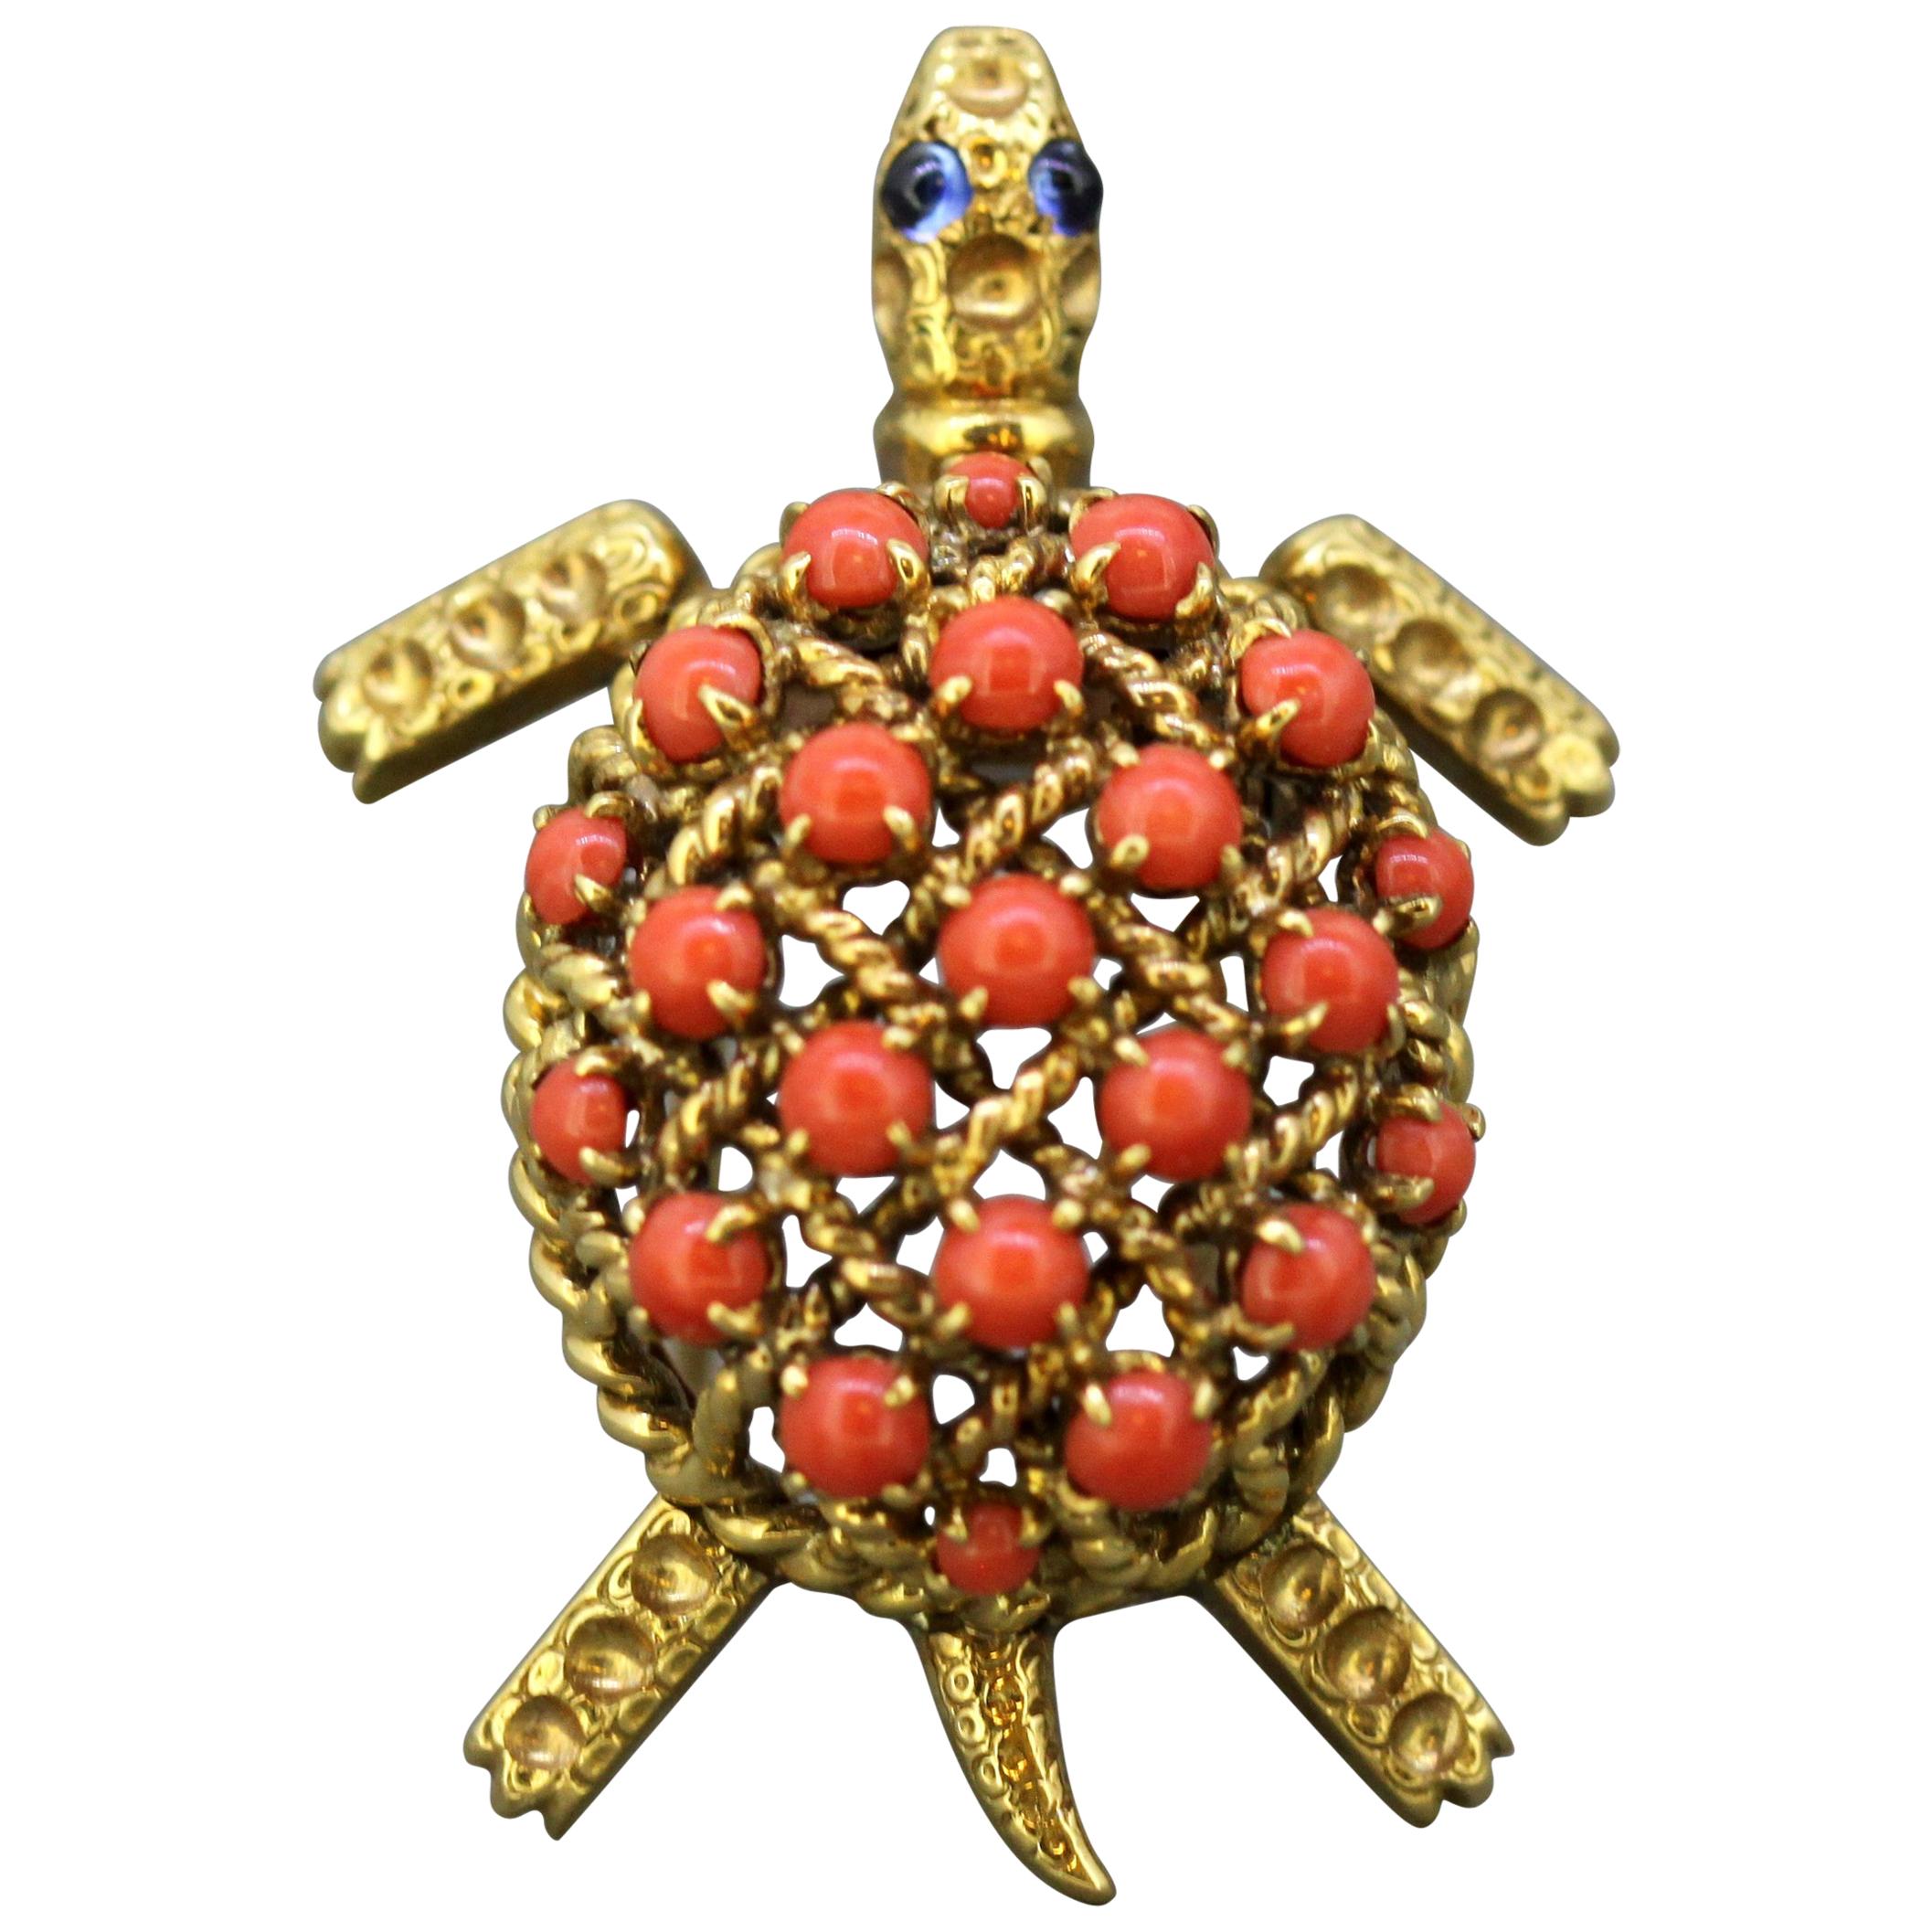 Cartier, 18 Karat Gold Turtle Brooch with Natural Coral and Blue Sapphires